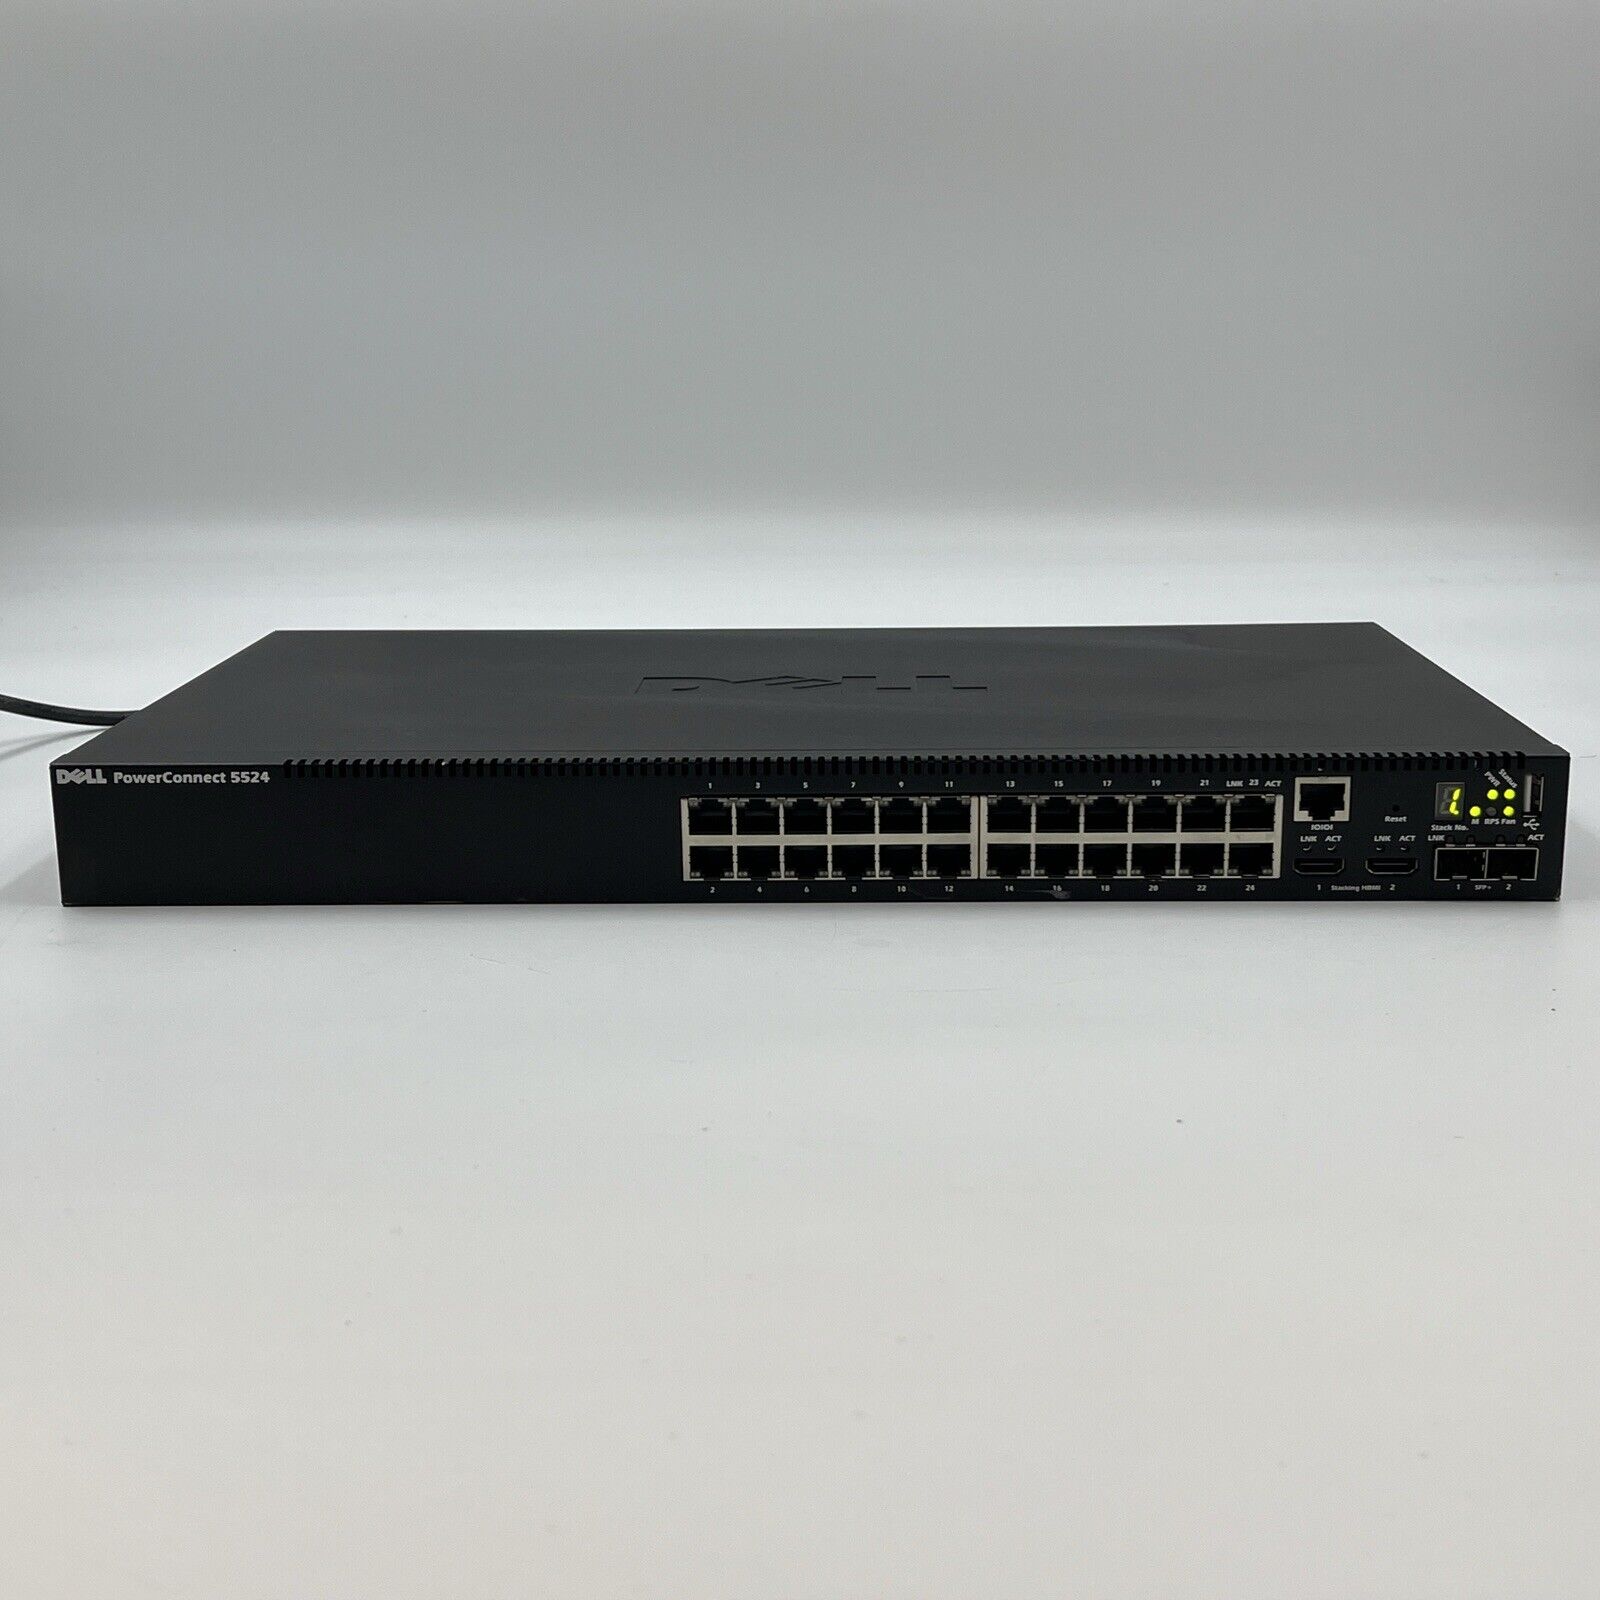 Dell PowerConnect 5524 24-Port Gigabit Ethernet Switch